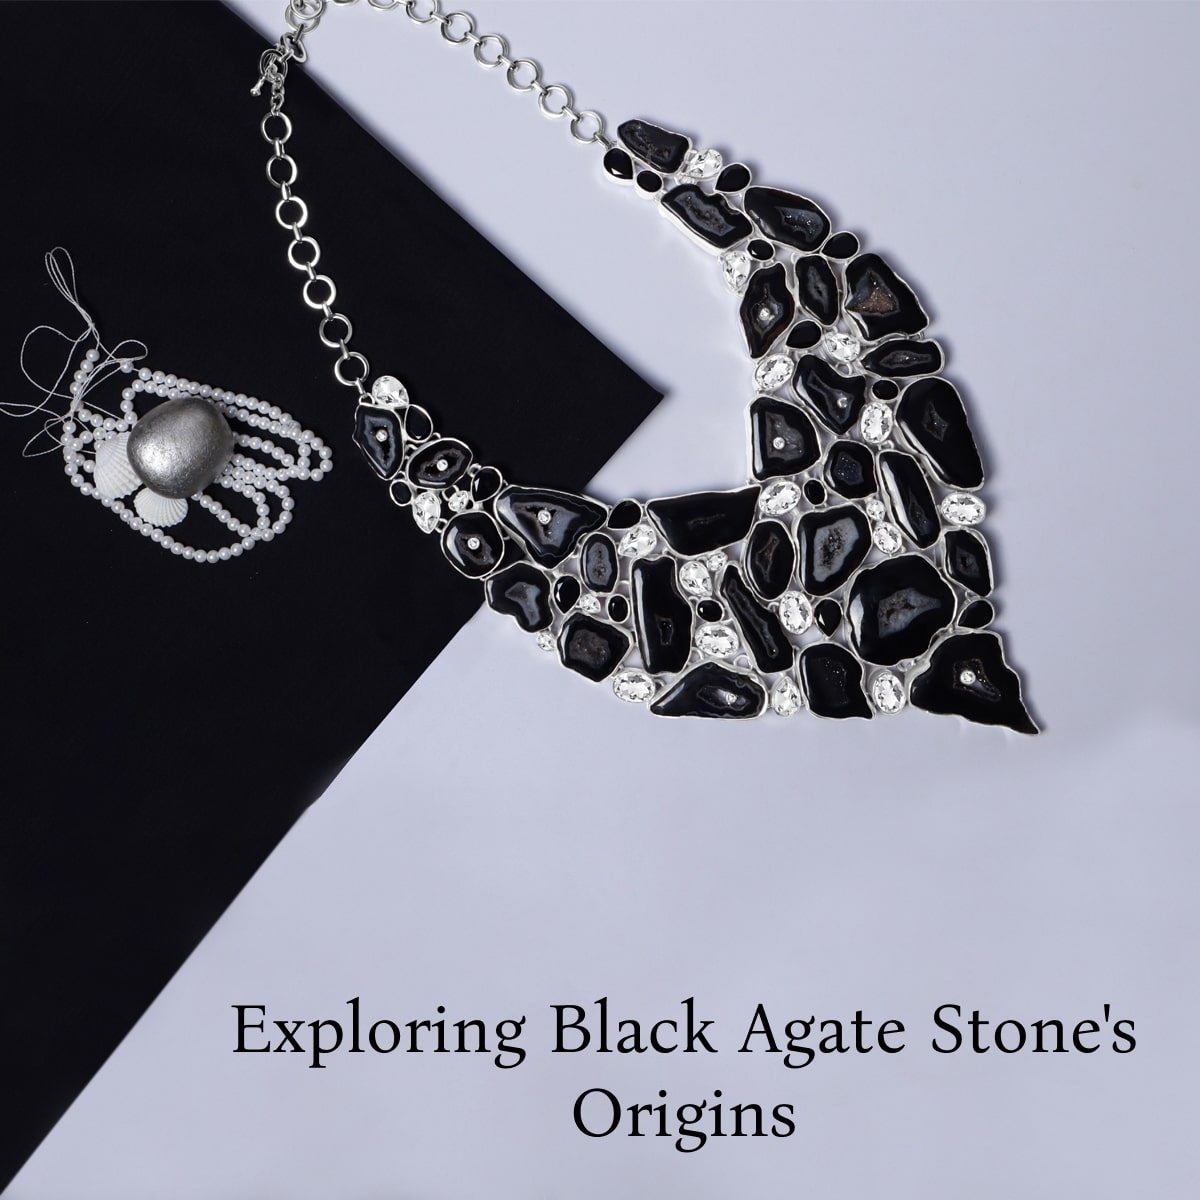 History of Black Agate Stone